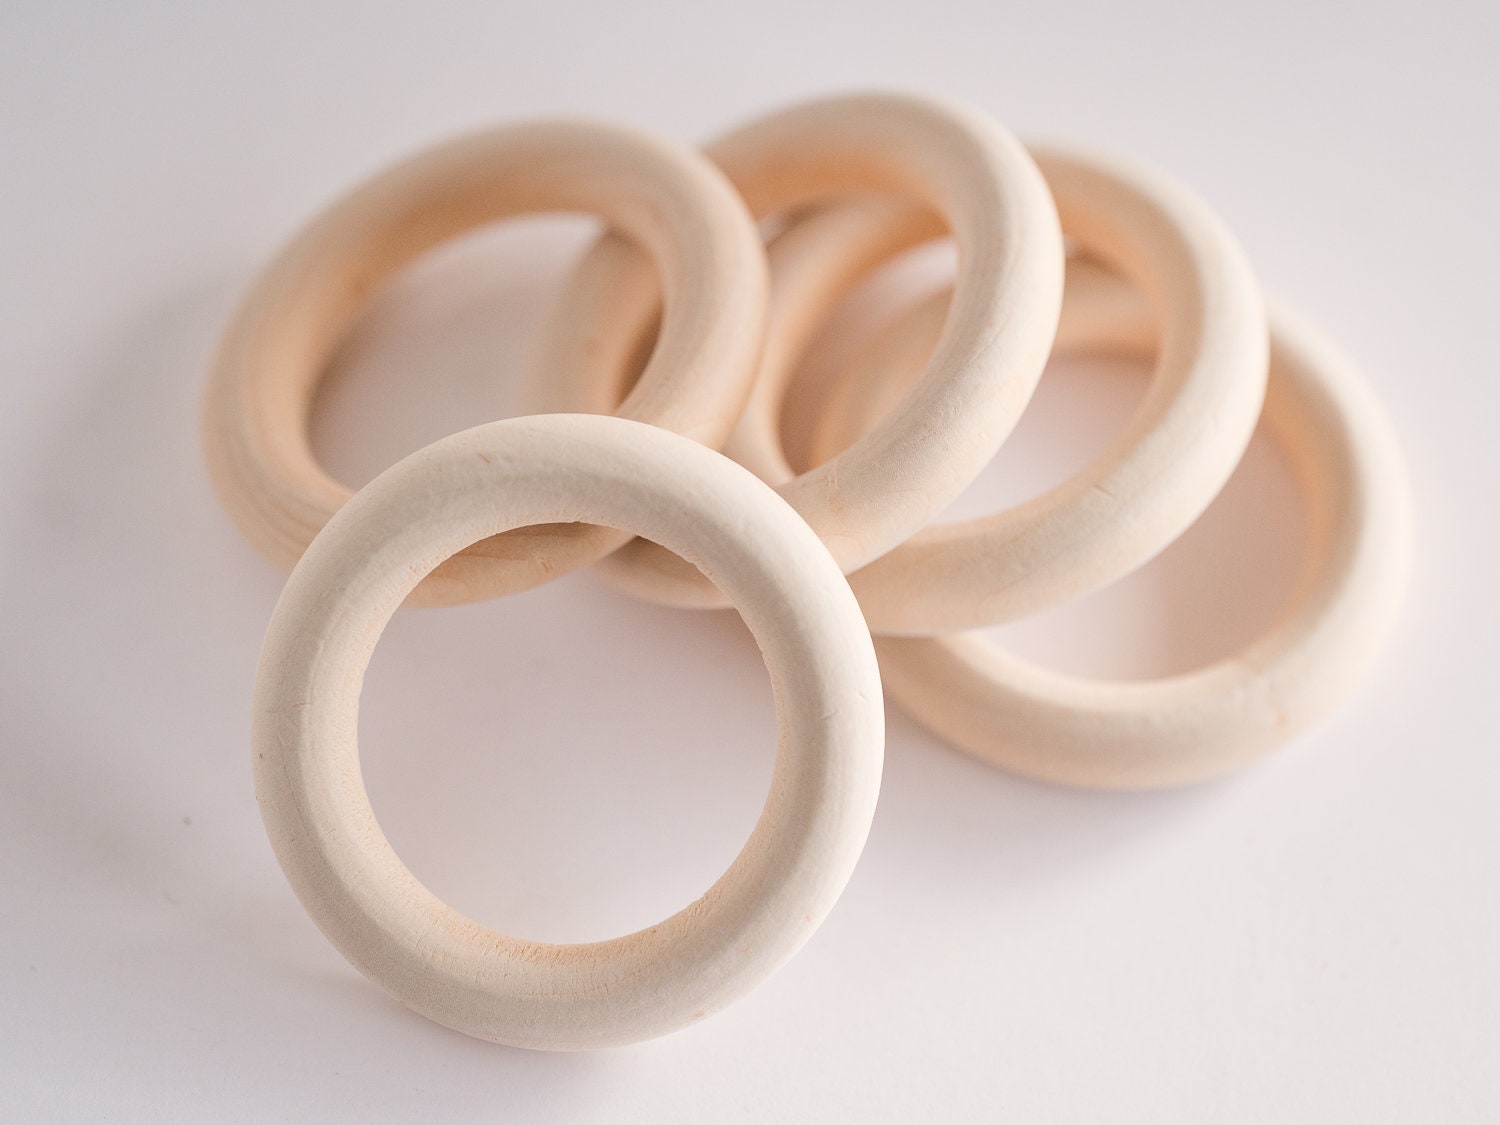 Bestsupplier 50 Pcs Unfinished Solid Wooden Rings for Craft, Ring Pendant and Connectors Jewelry